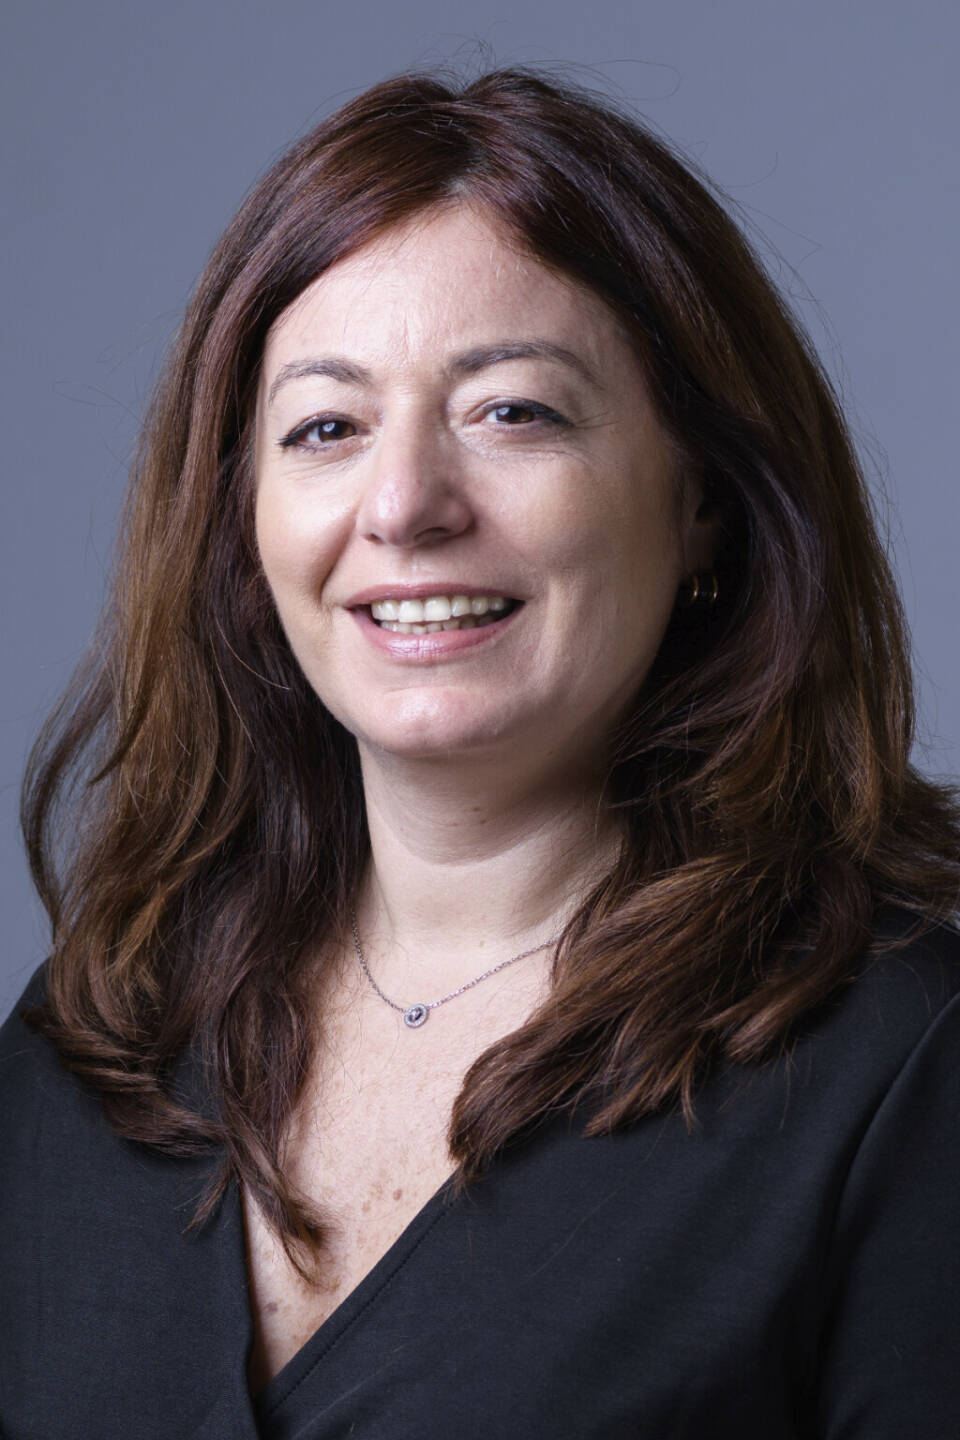 Annalisa Piazza, Fixed Income Research Analyst bei MFS Investment Management, Credit: MFS